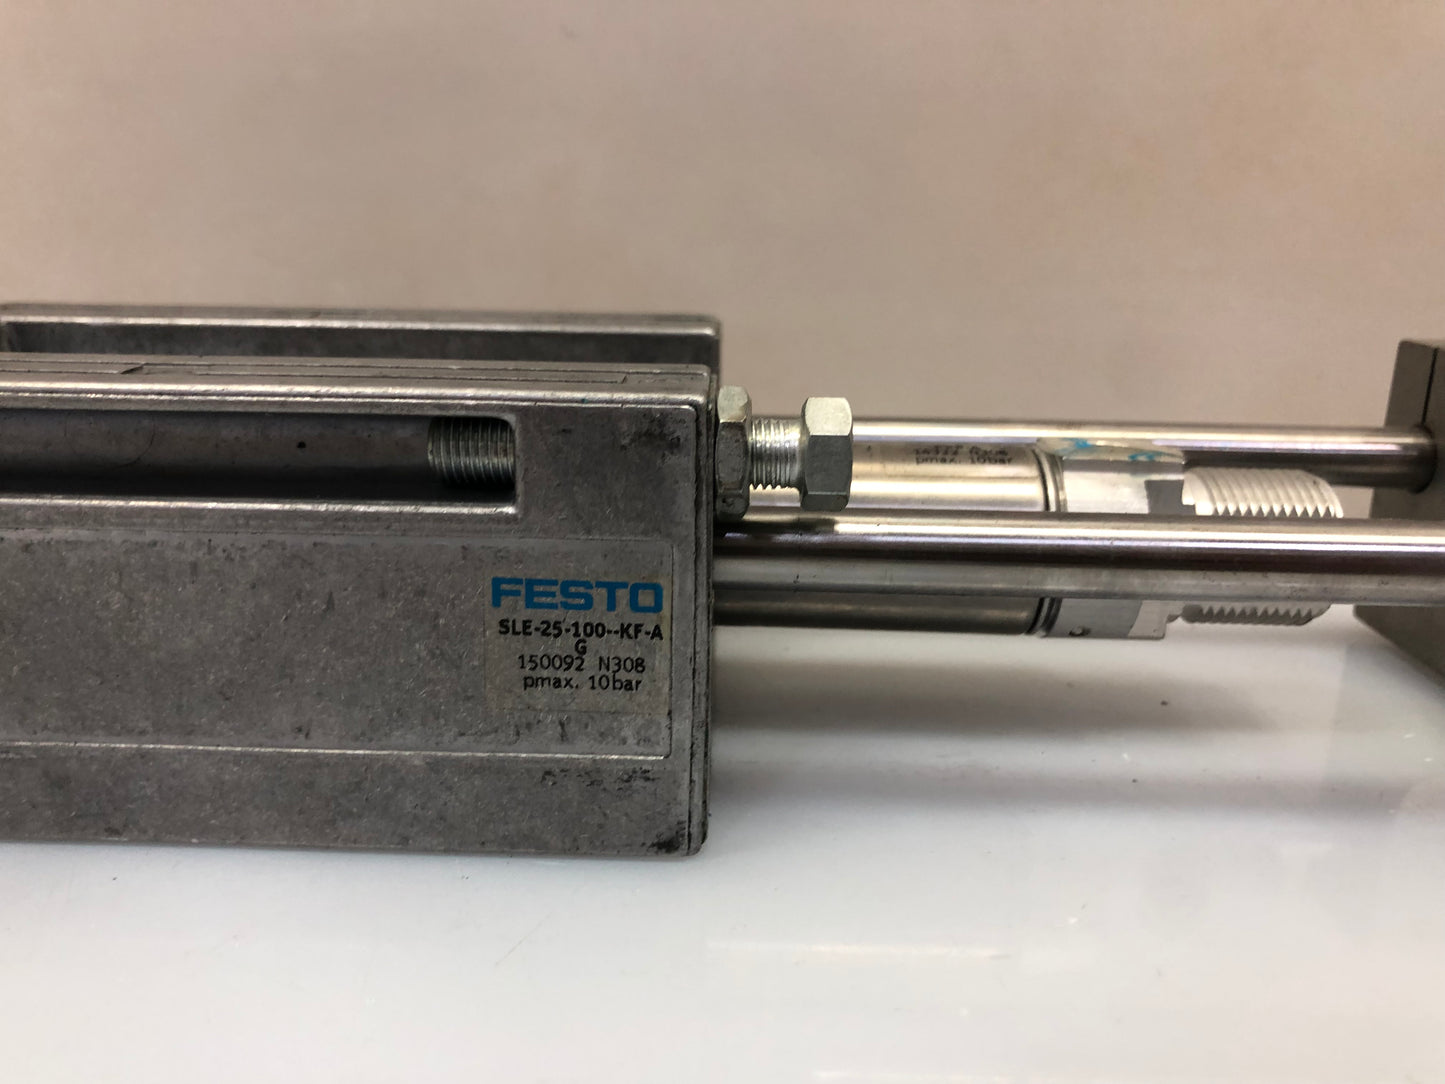 Festo SLE-25-100-KF-A-G 150092 Linear drive with Festo DSNU-25-100-PPP-A 14322 Cylinder